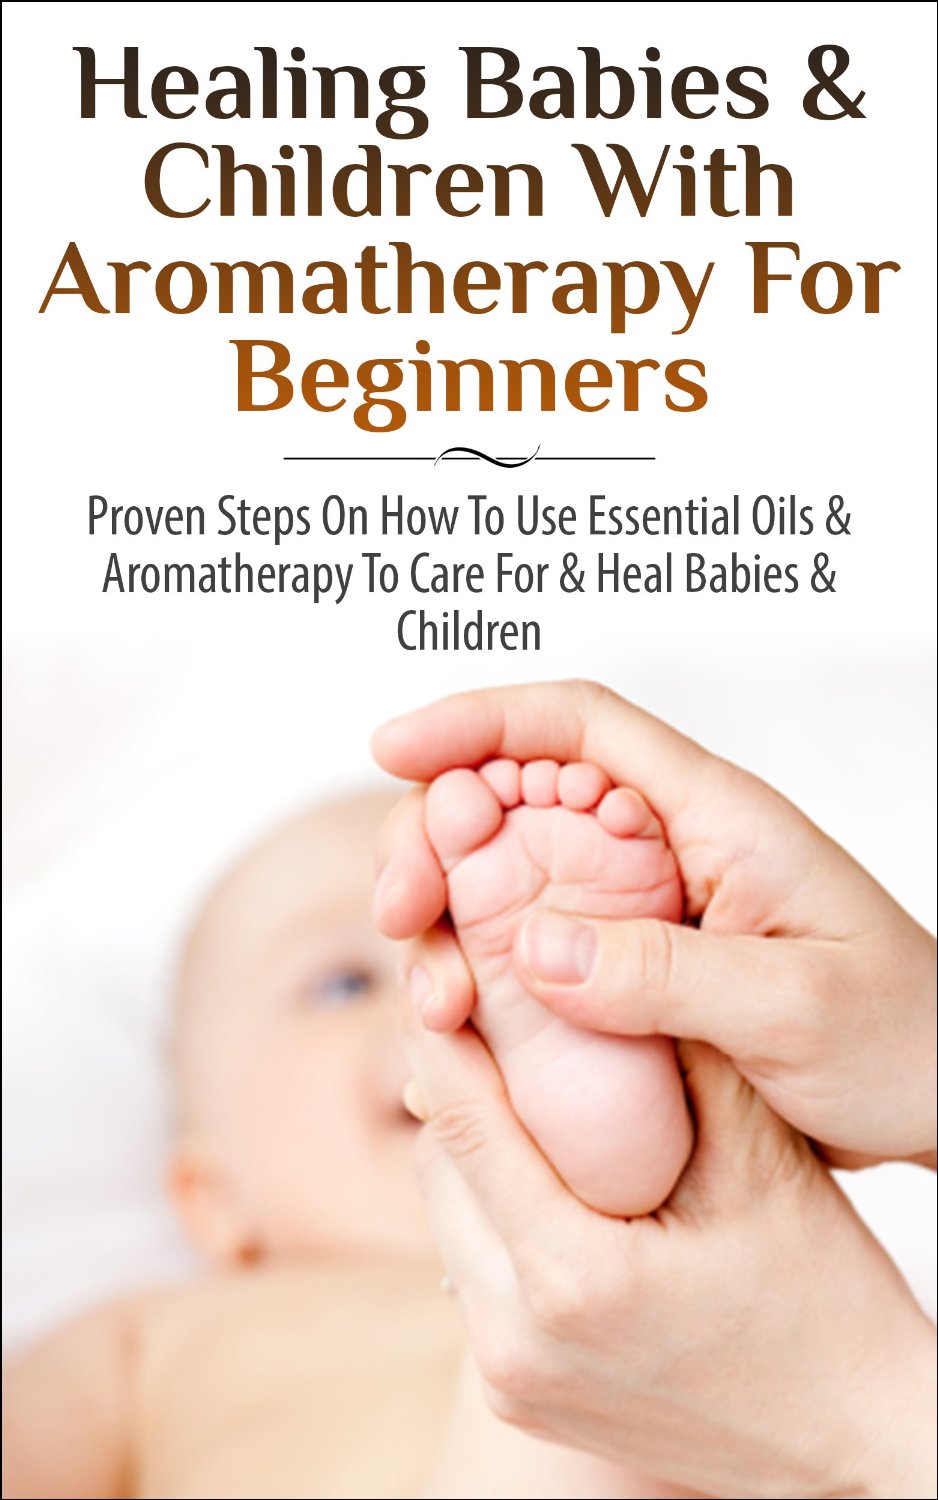 Healing Babies and Children with Aromatherapy for Beginners by Lindsey Pylarinos